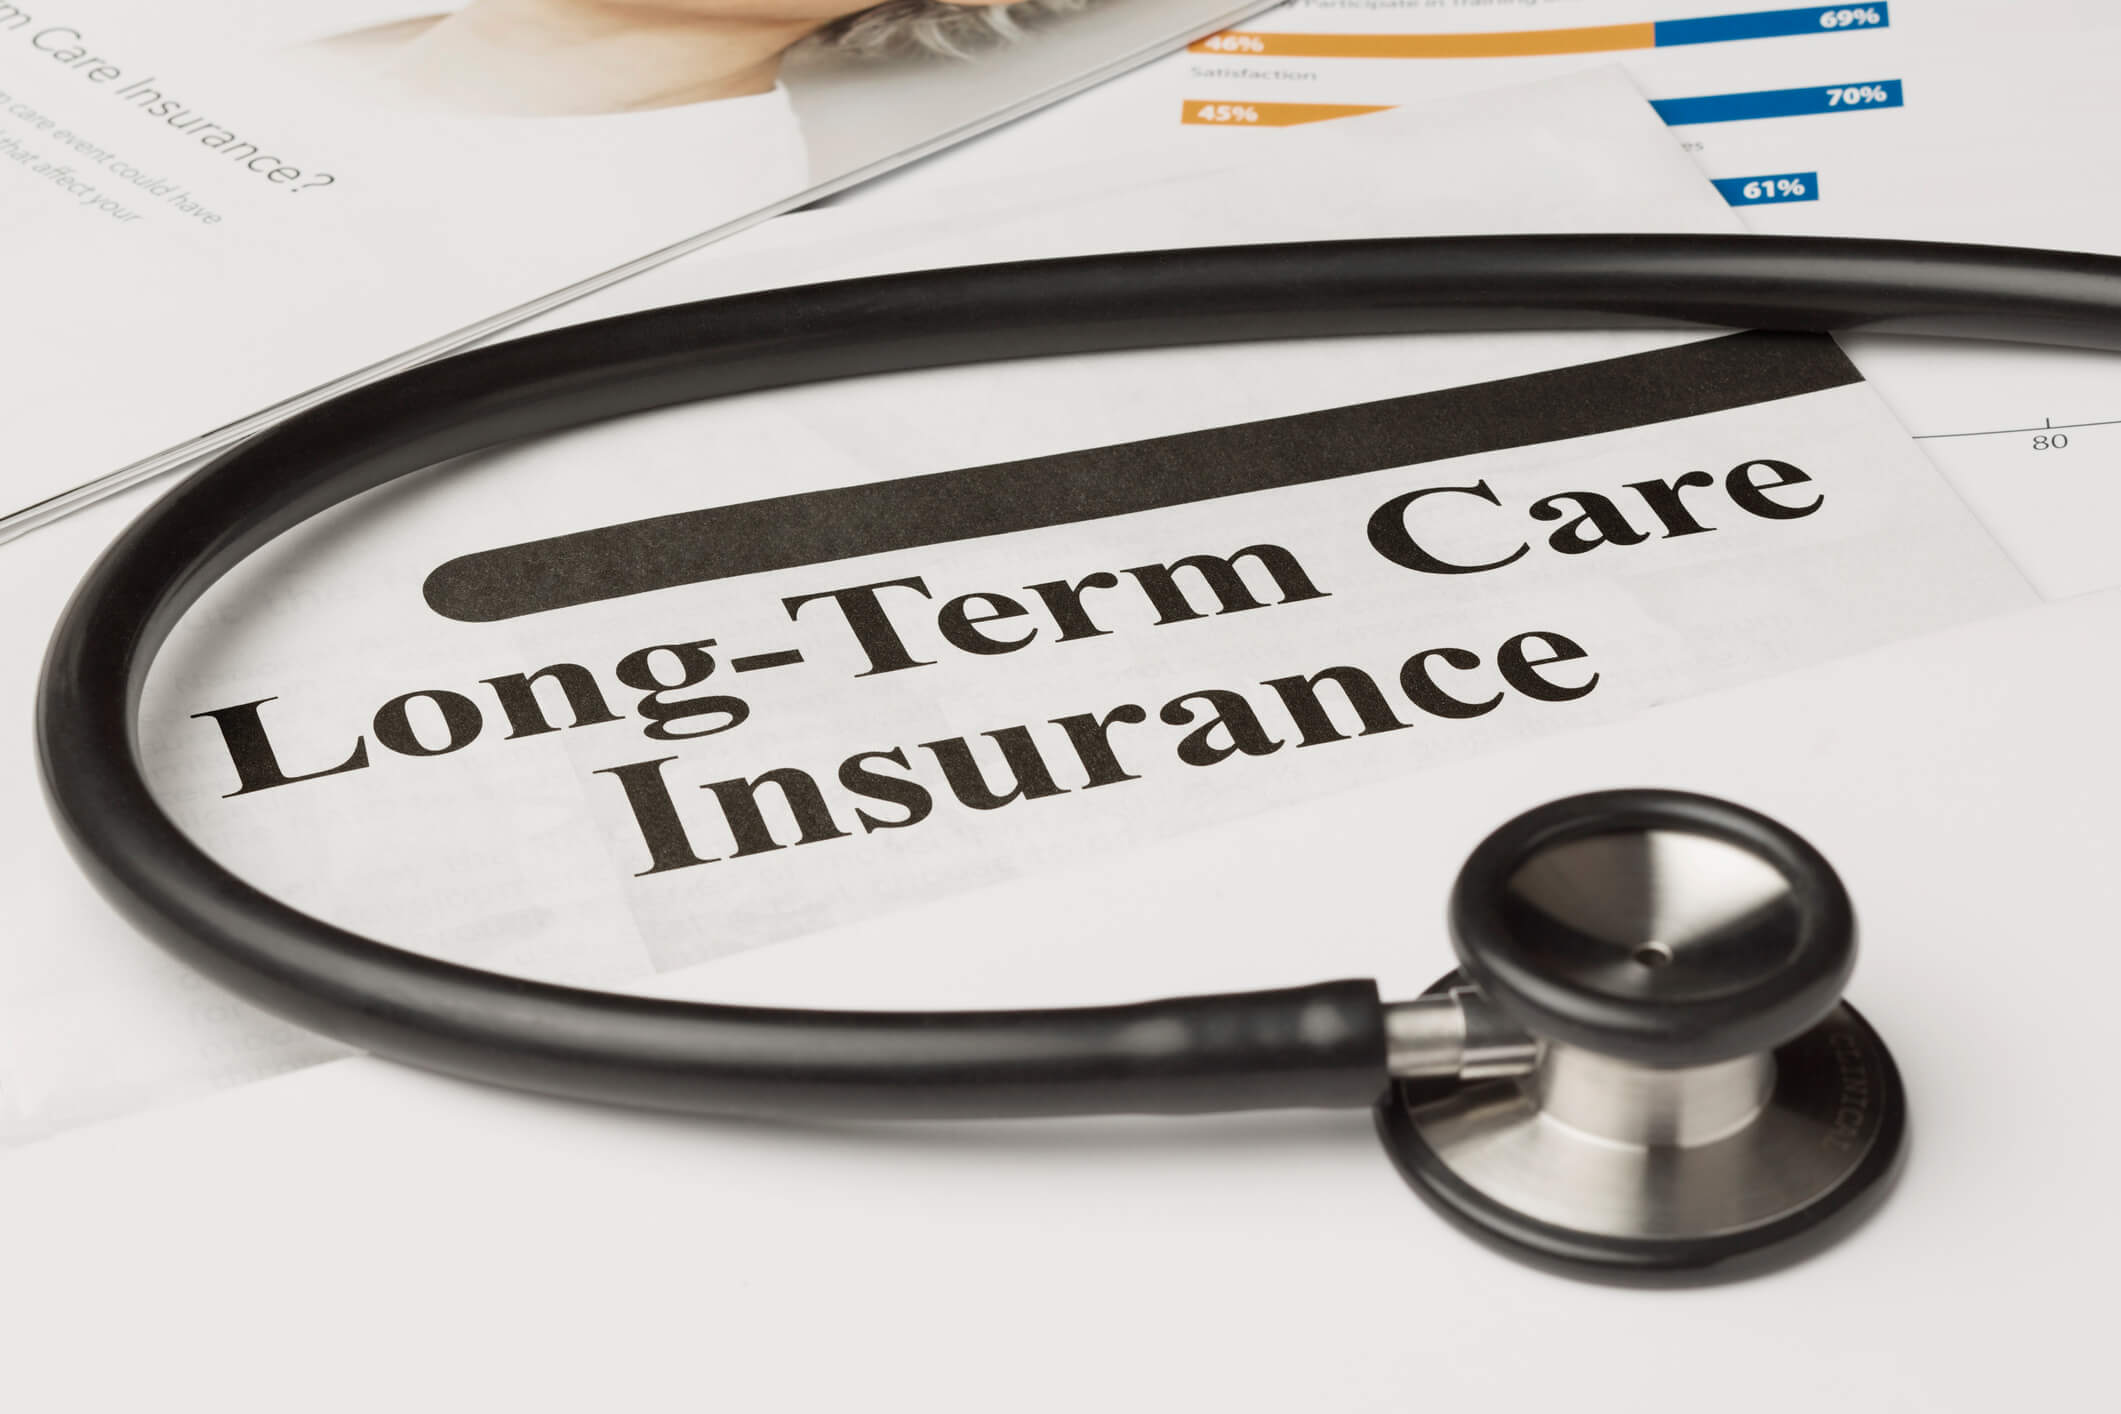 How to Use Your Long Term Care Policy While Living at an Independent Living Community 